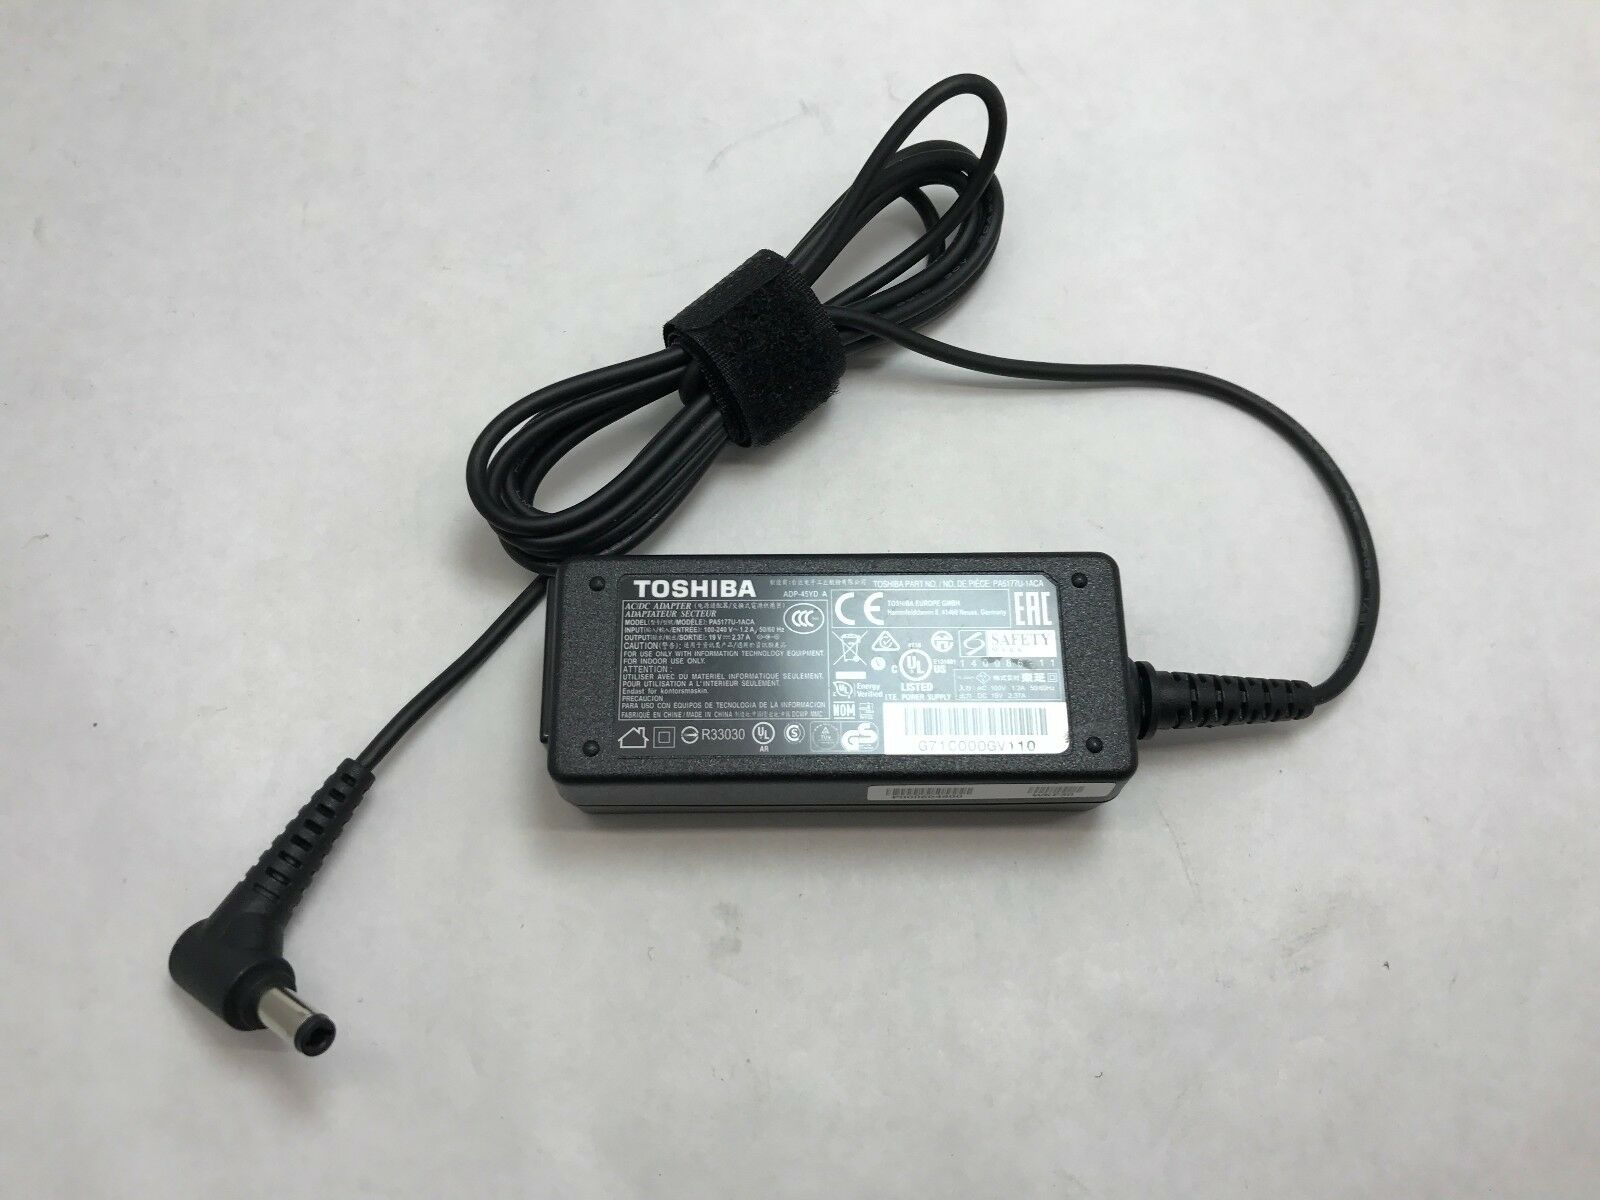 Toshiba G71C000GX110 Ac Adapter Power Supply Cord Cable Charger Genuine Original